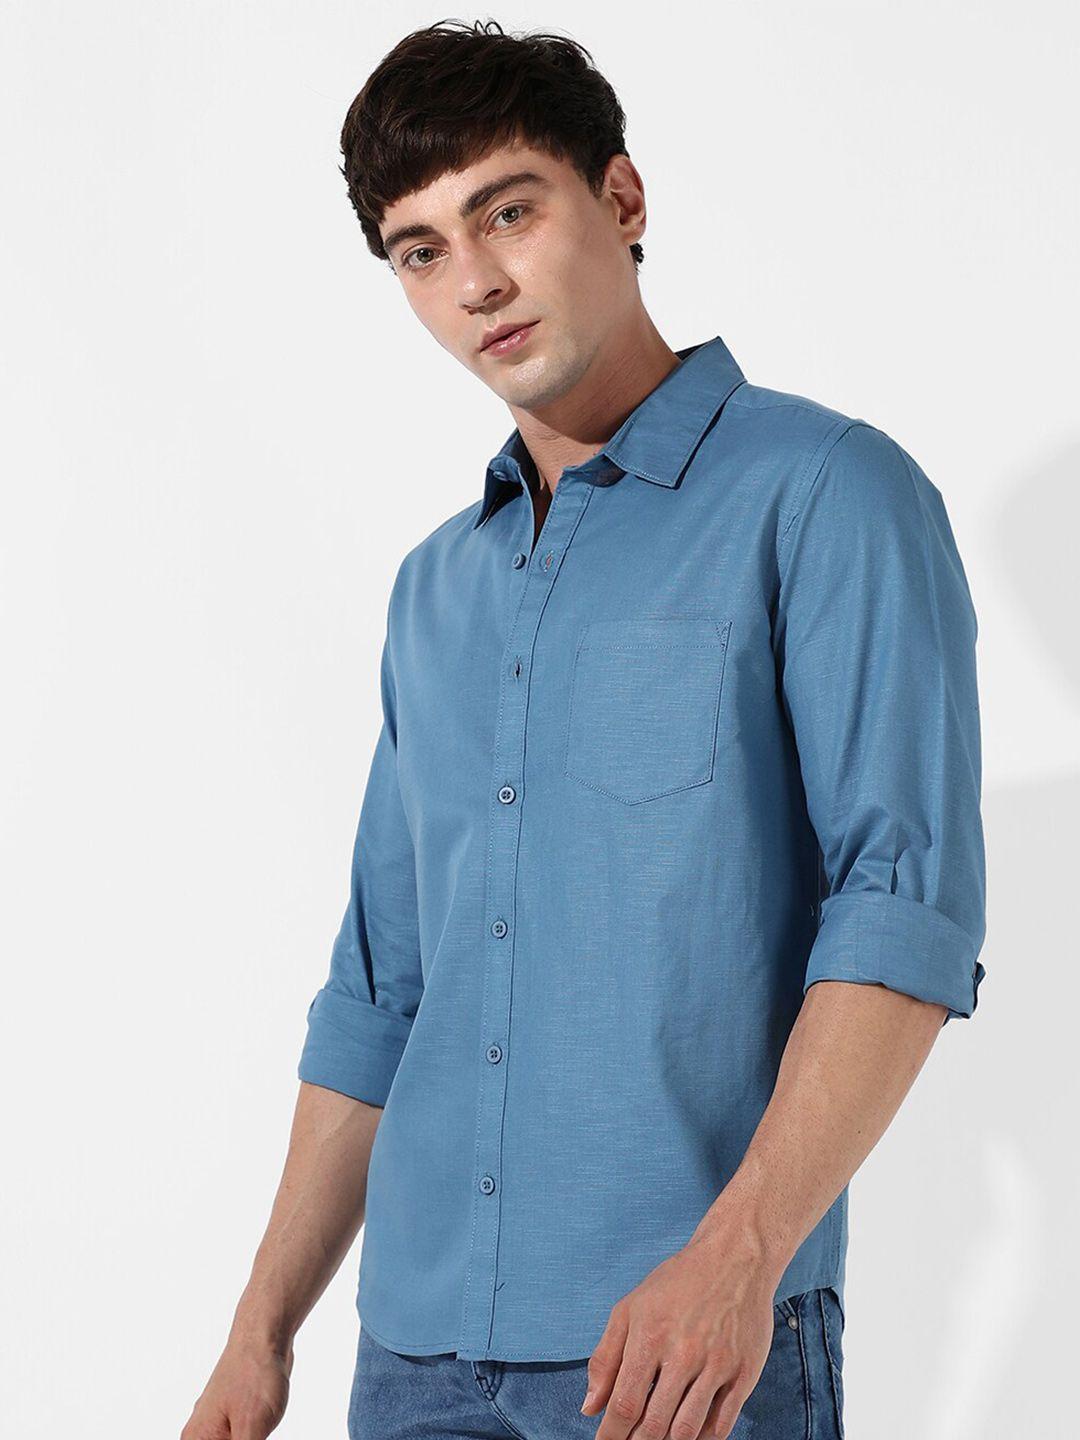 campus-sutra-blue-classic-cotton-casual-shirt